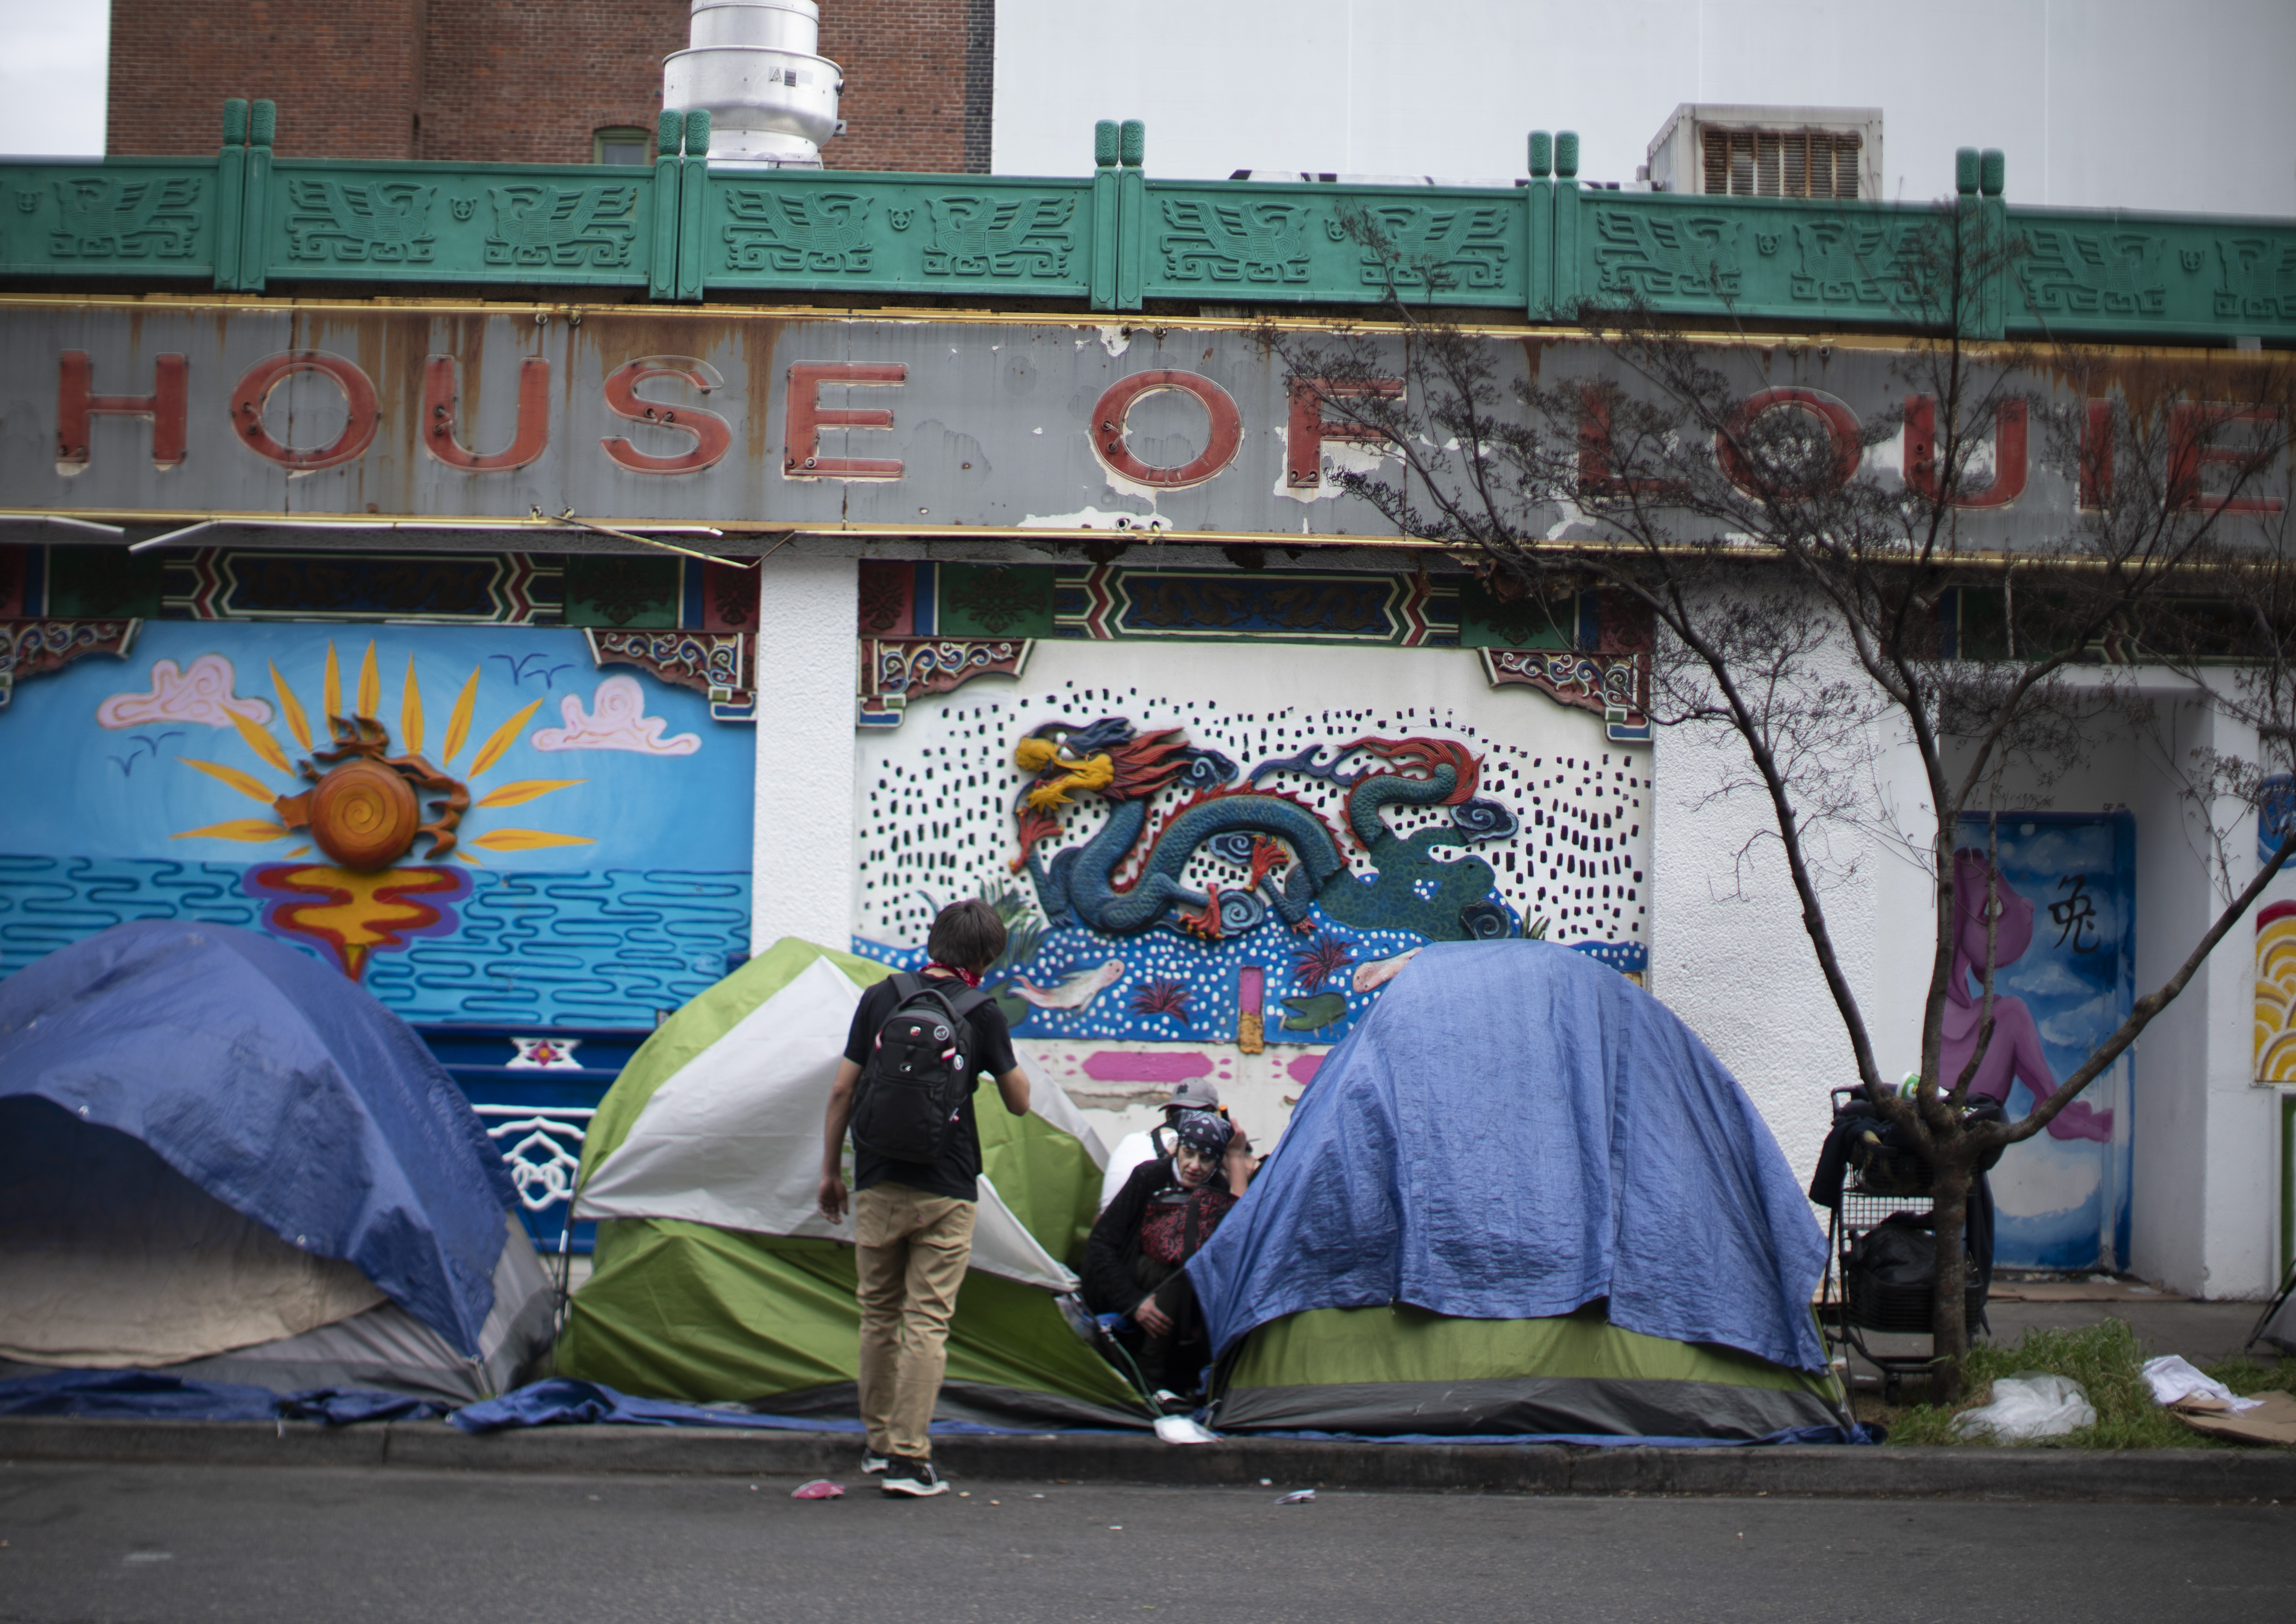 Portland Announces It Will Aggressively Clean Or Remove Homeless Encampments Oregonlive Com